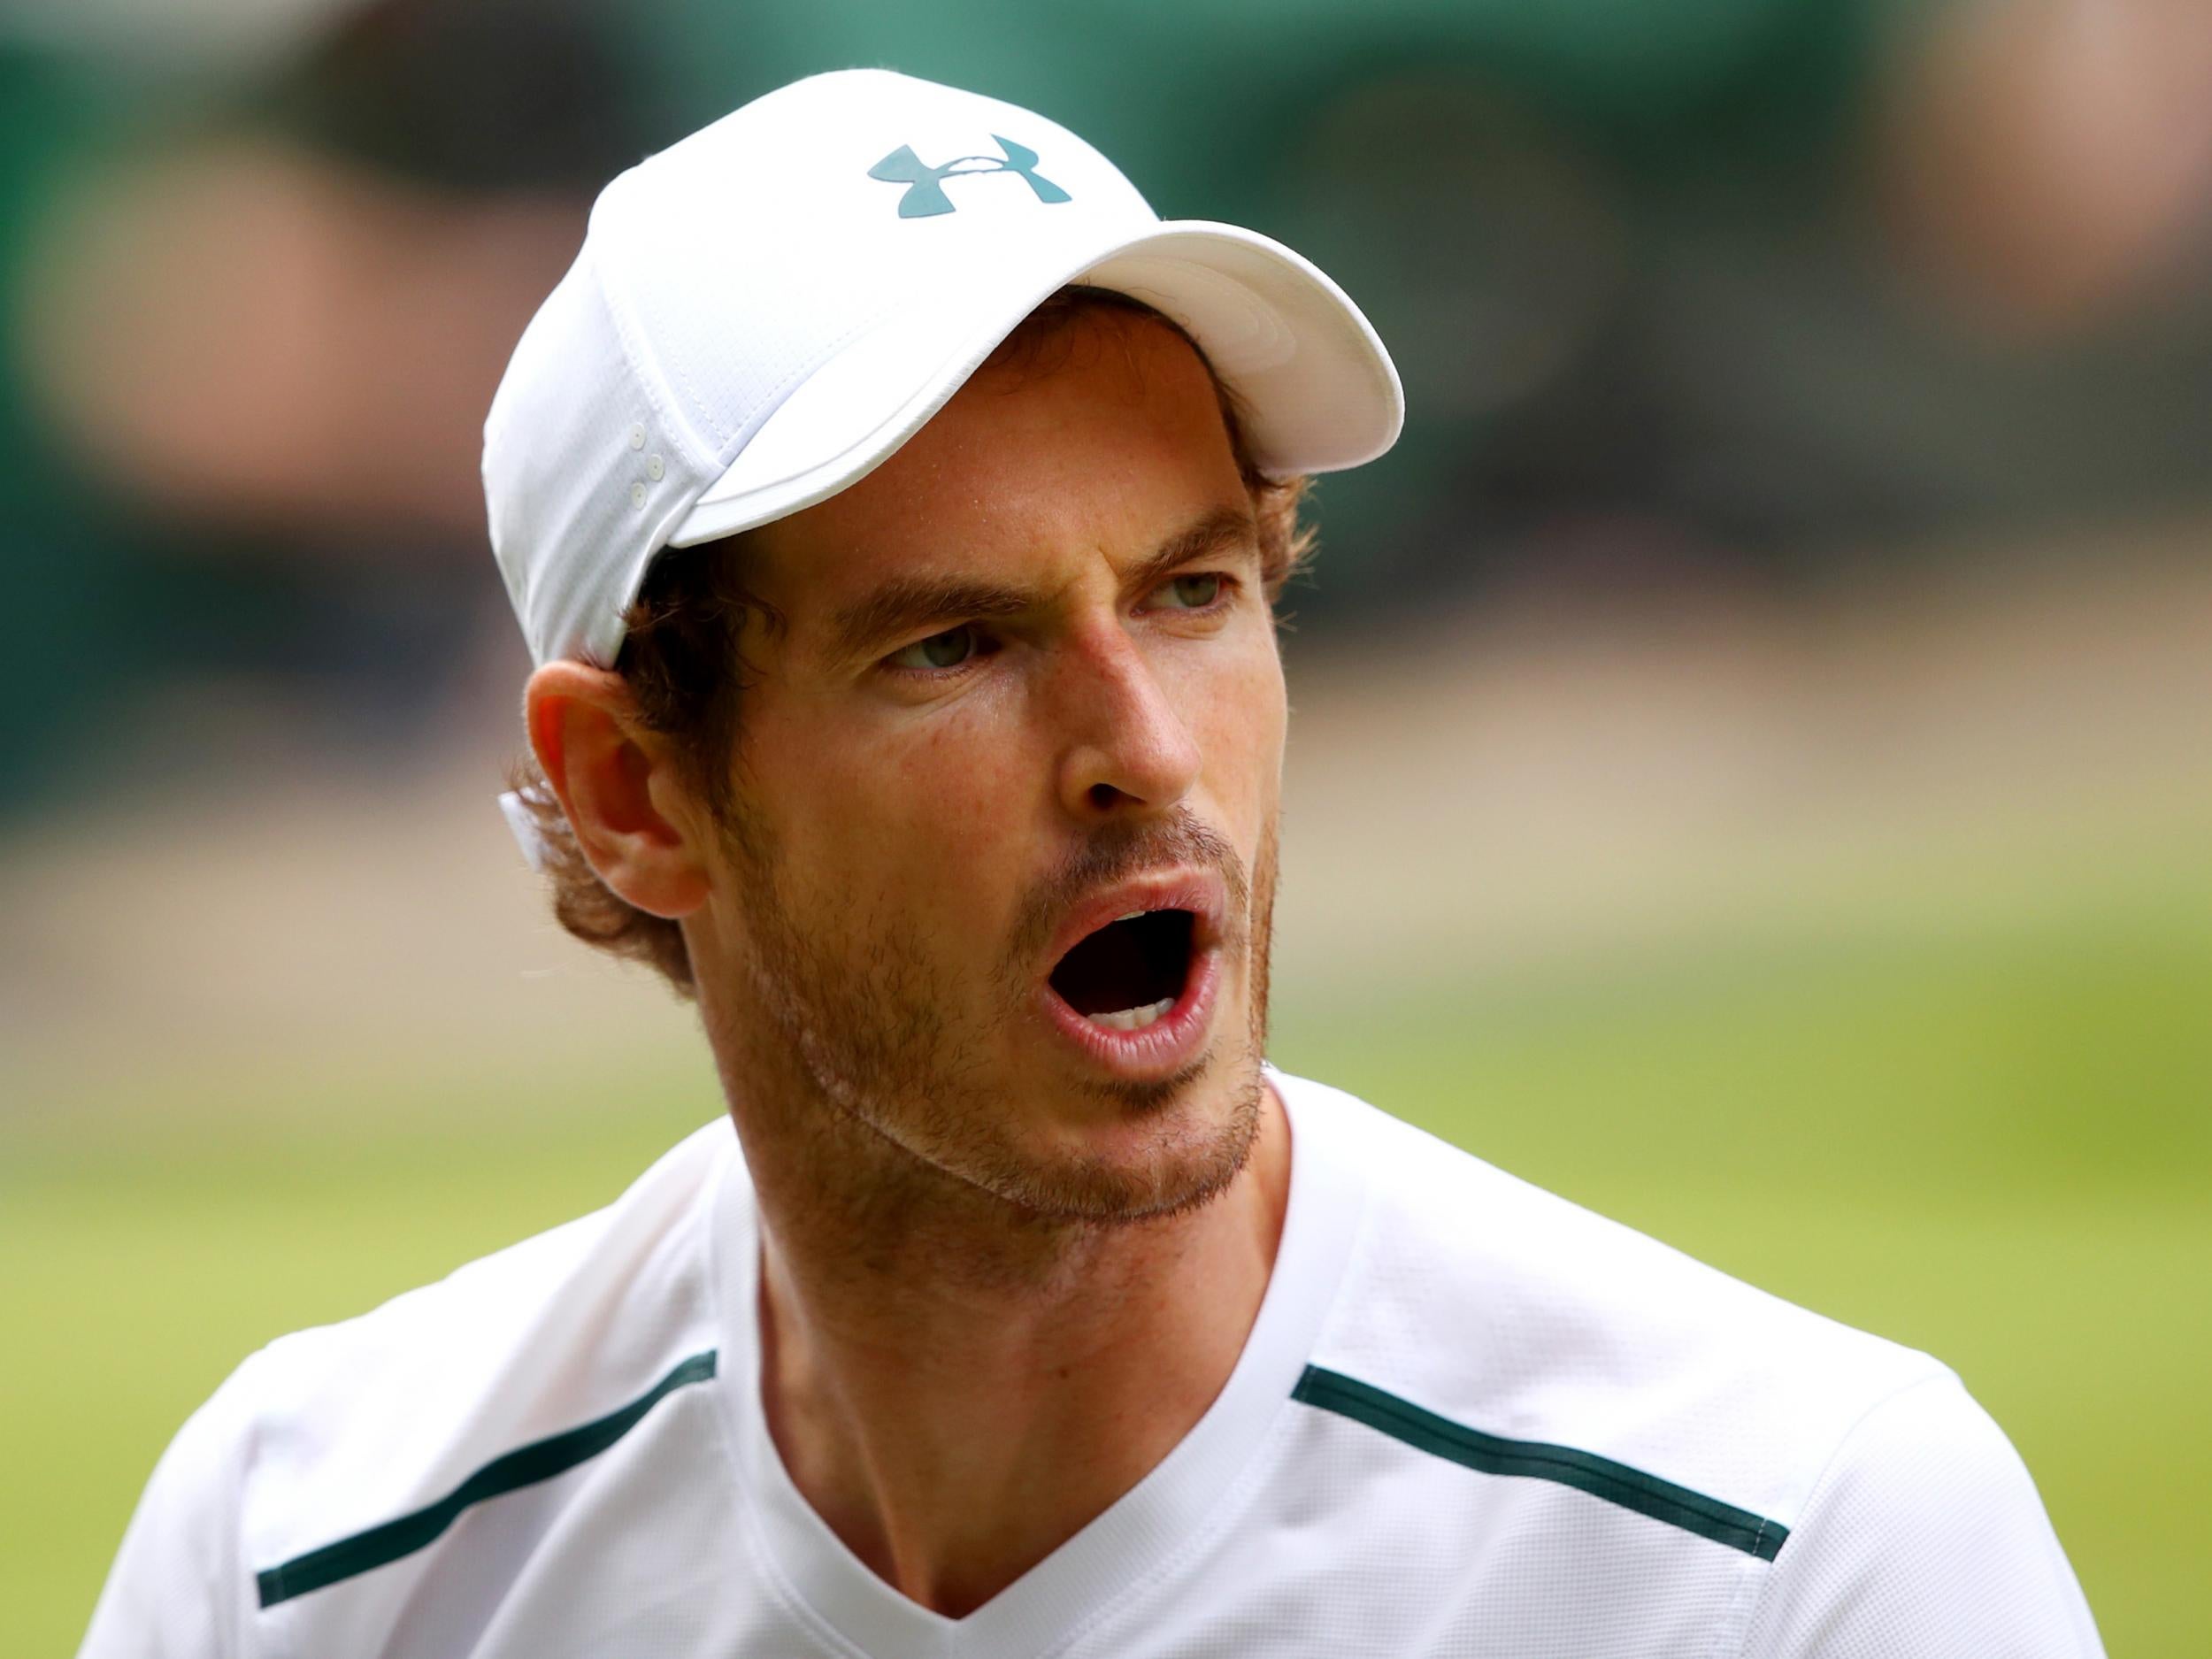 Andy Murray Proud Of Equal Pay In Tennis But Discloses Sexist Texts Received About Amelie